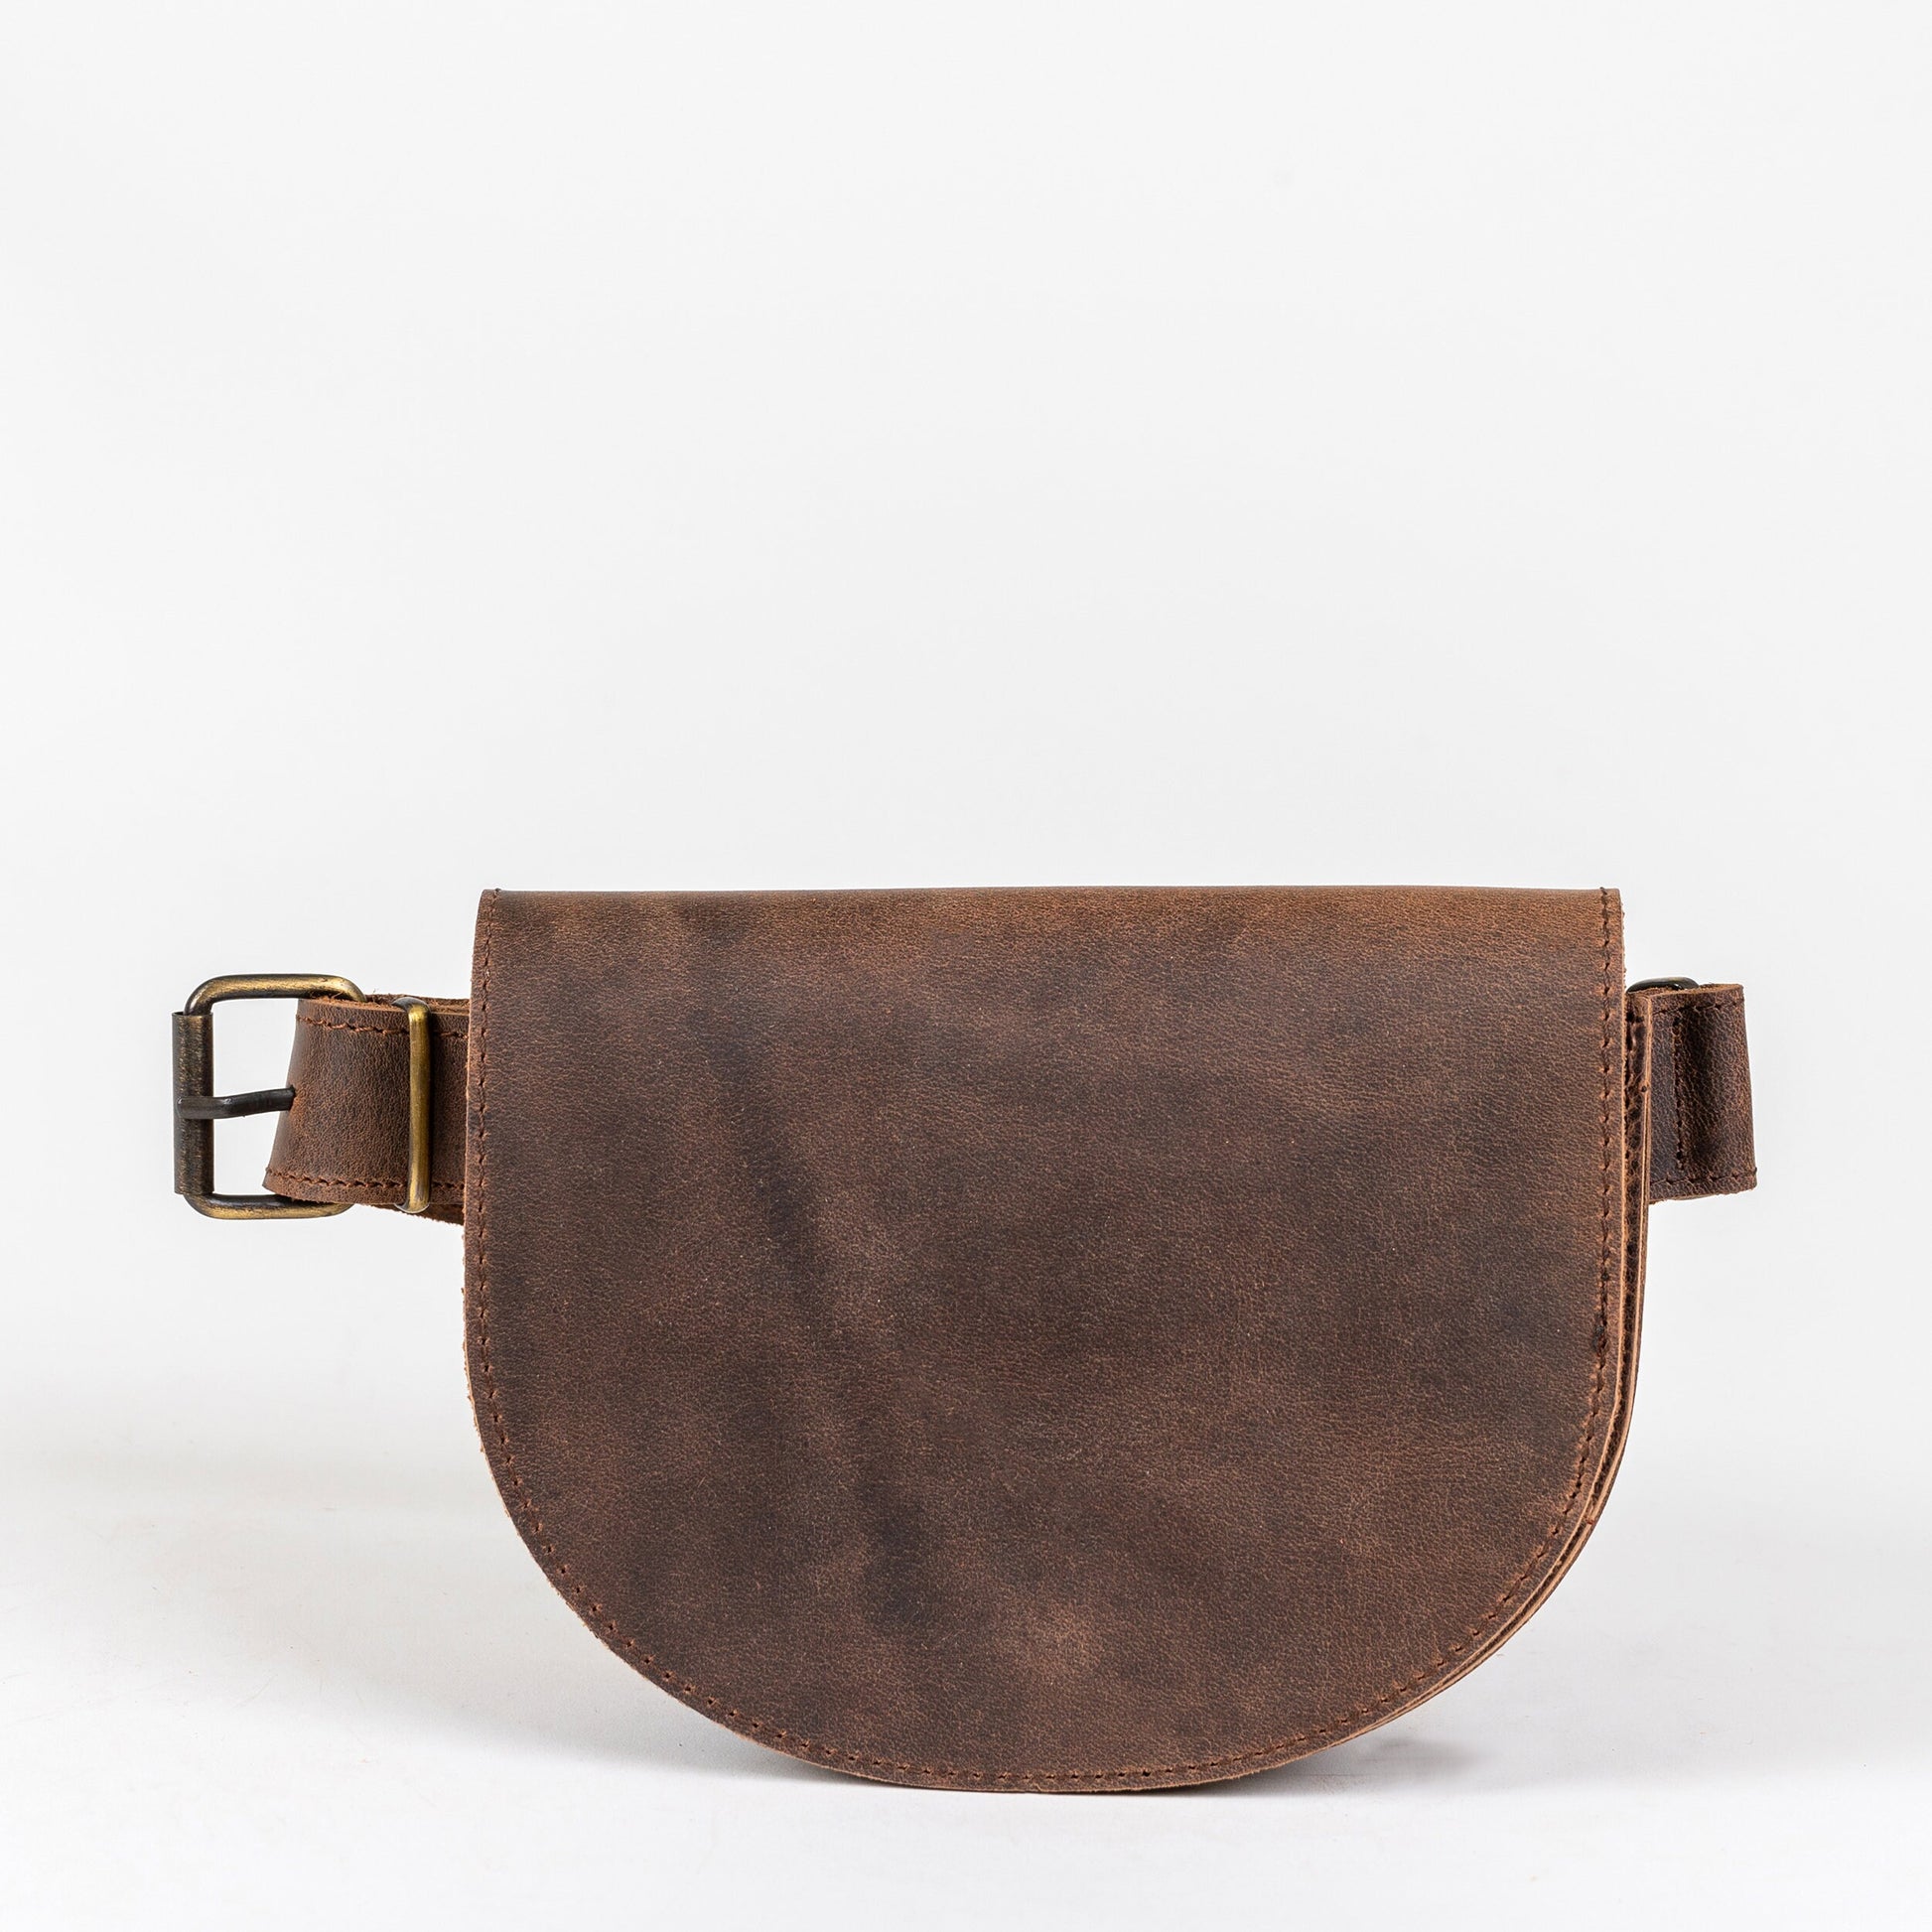 Leather fanny pack for woman, leather belt bag, leather bum bag, genuine leather fanny pack, bauchtasche, sac banane